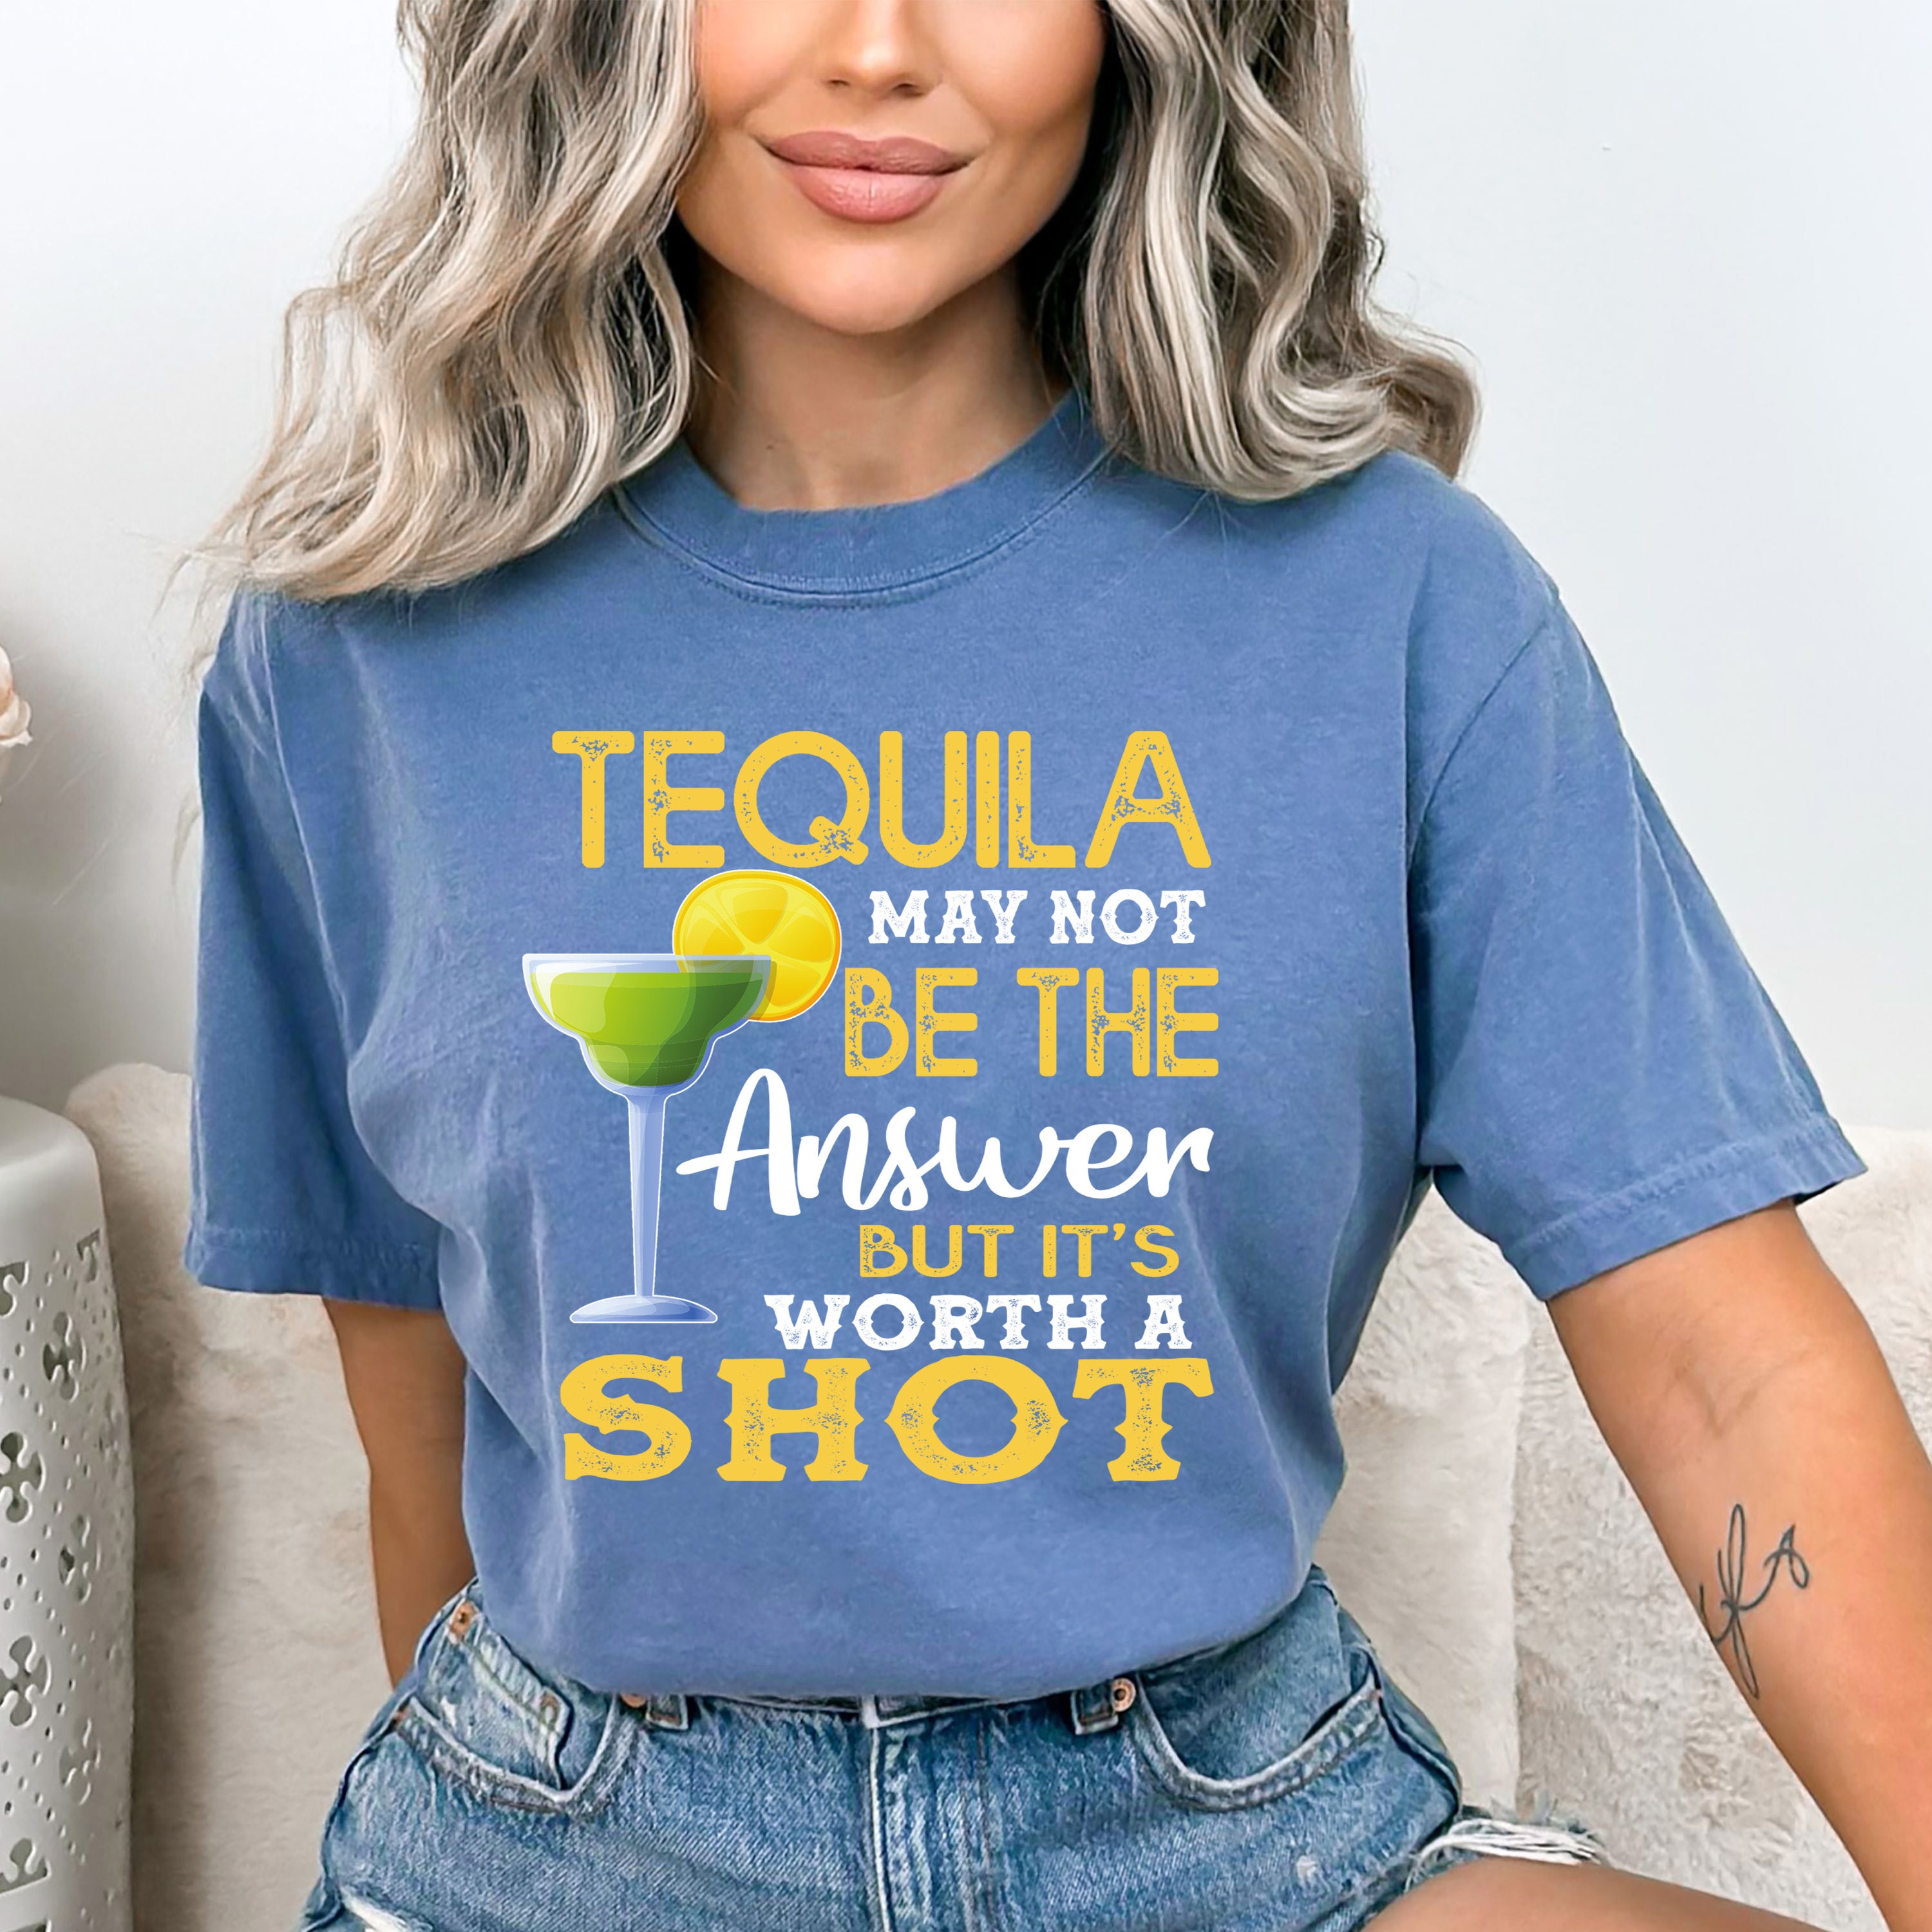 TEQUILA MAY NOT BE THE ANSWER - Bella Canvas